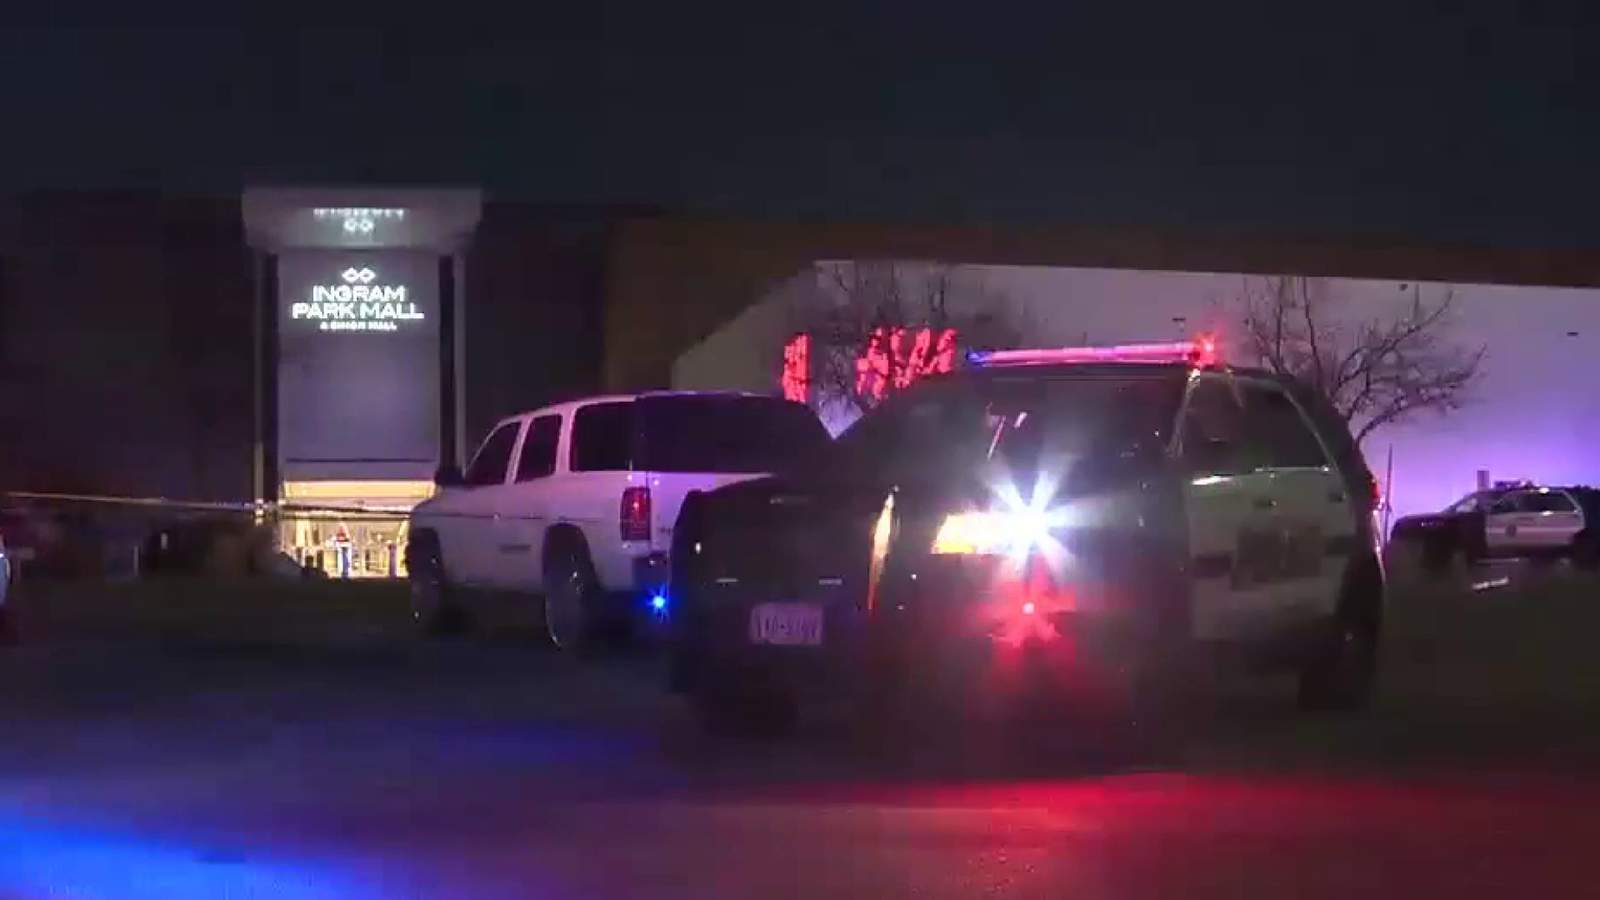 Man injured, hospitalized after shooting at Ingram Park Mall, police say